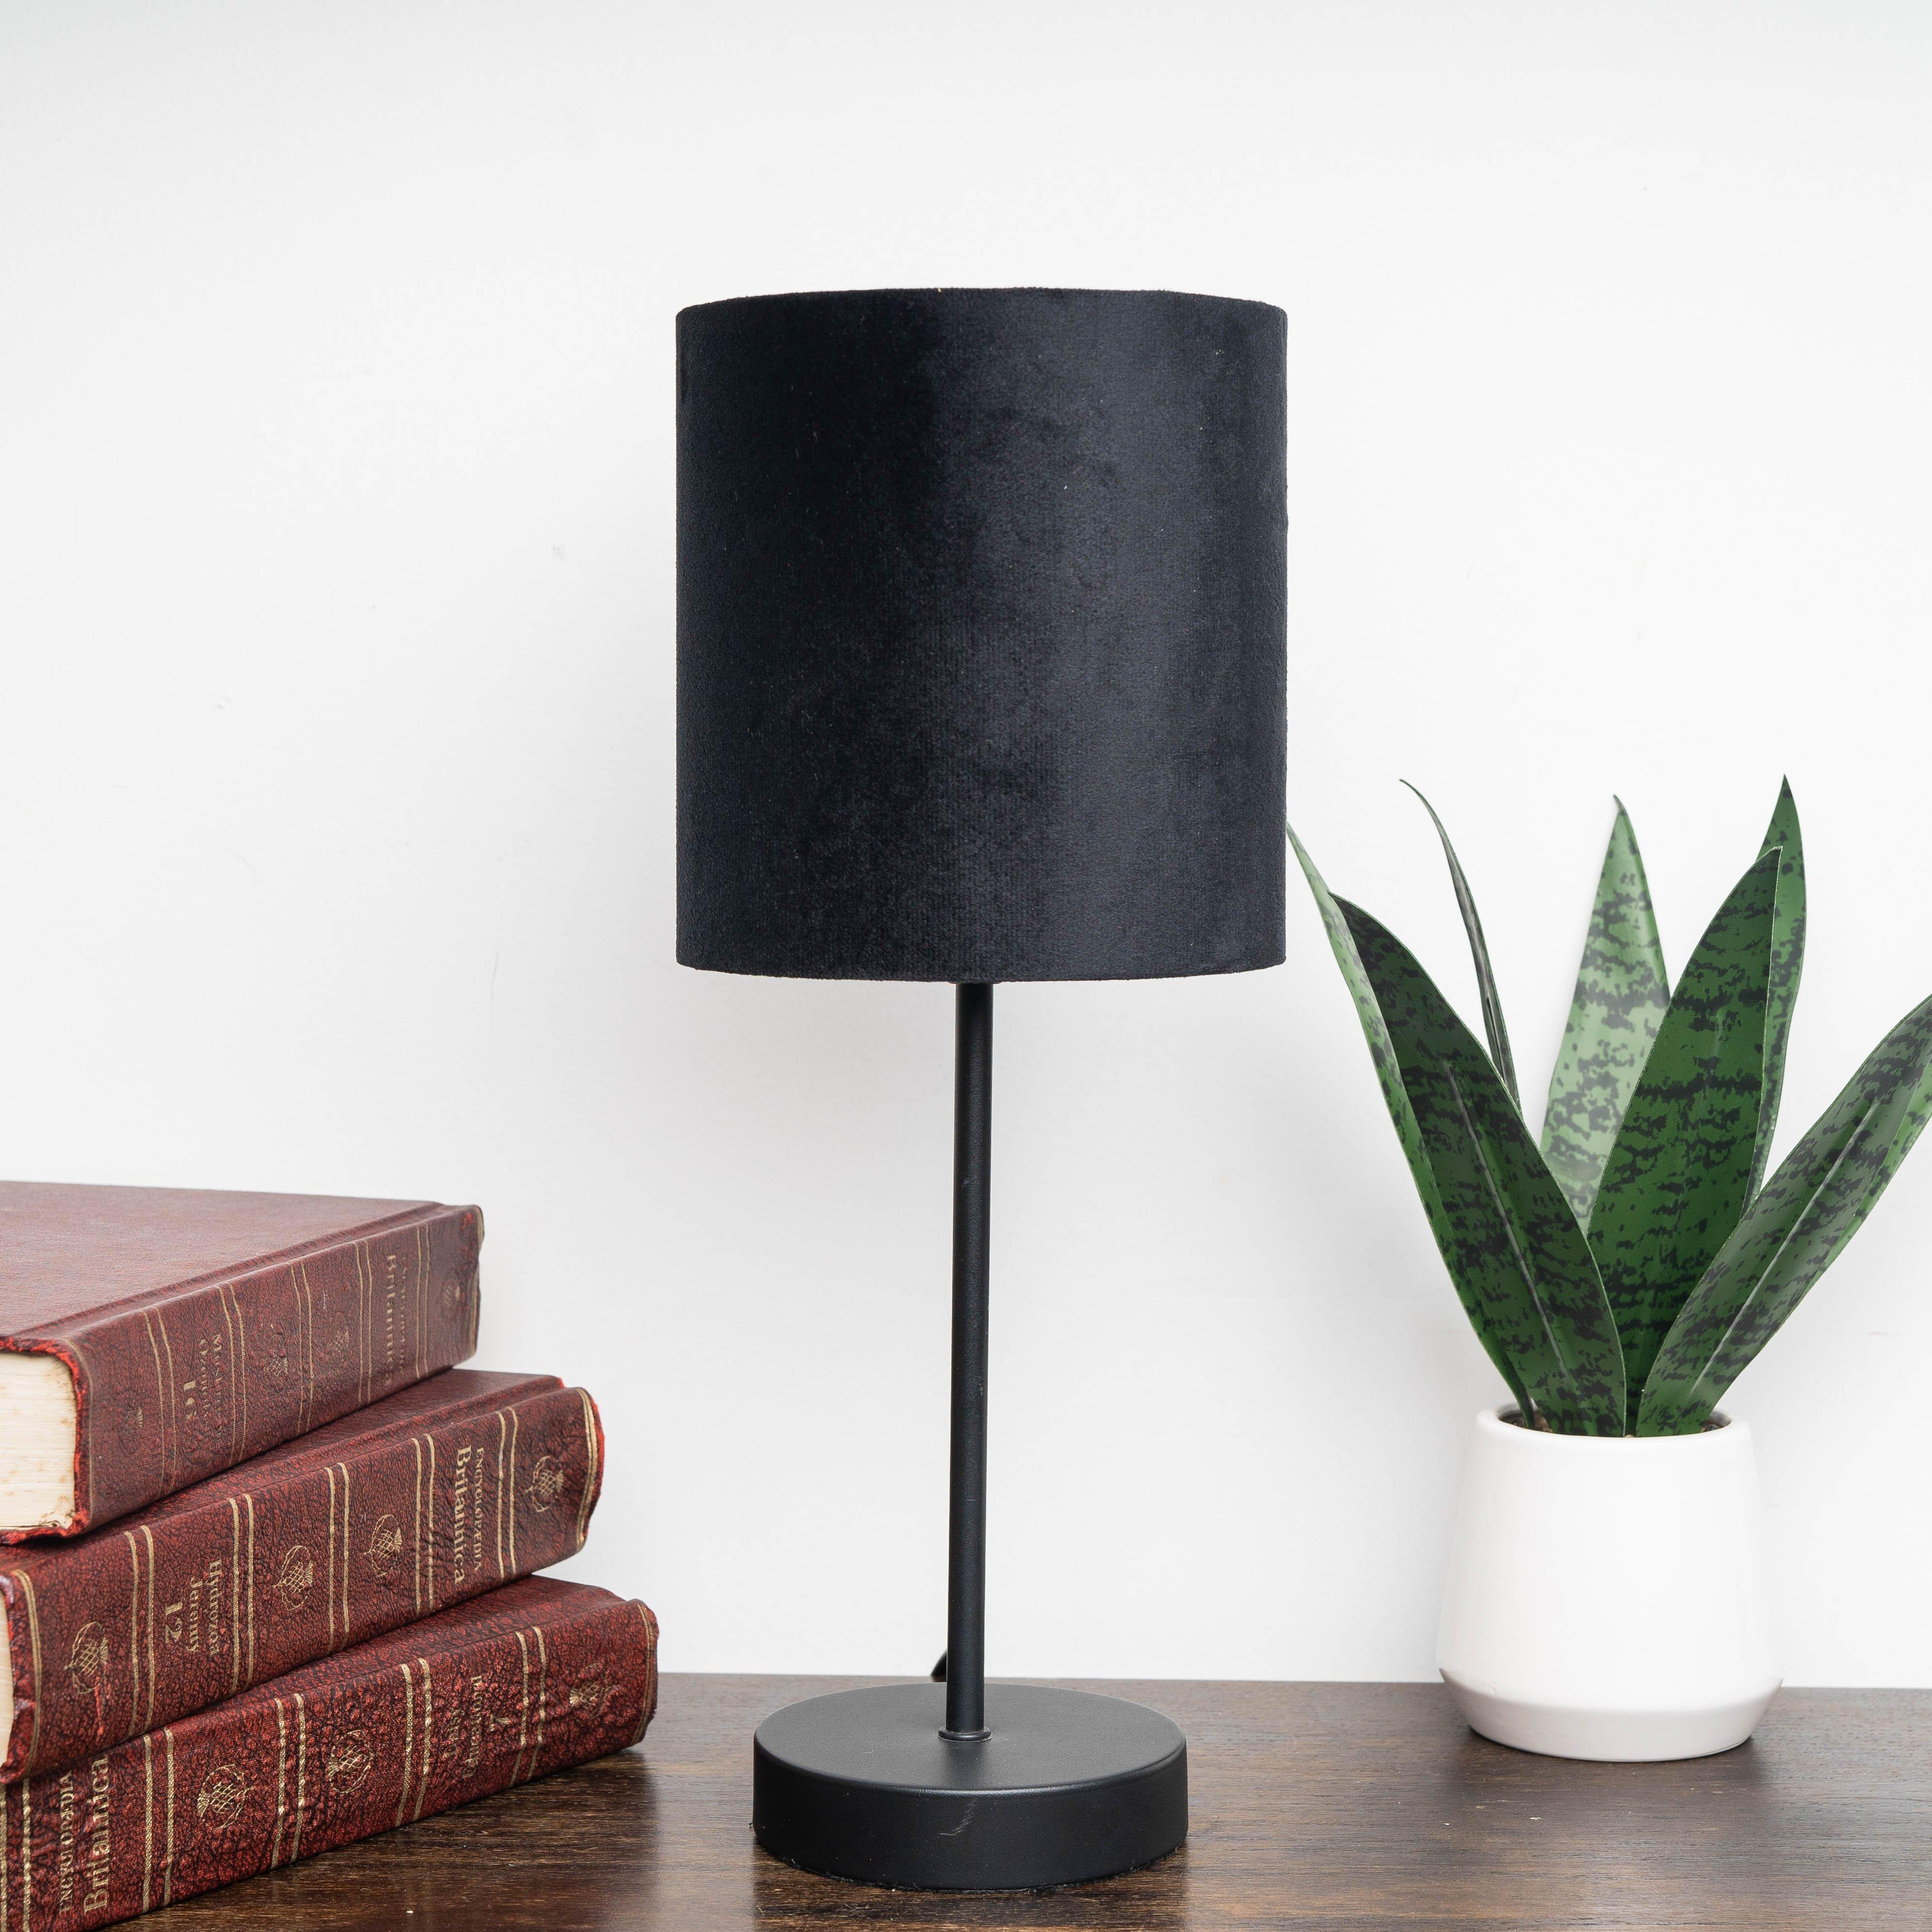 Hove Table Lamp with Black Shade - image 1